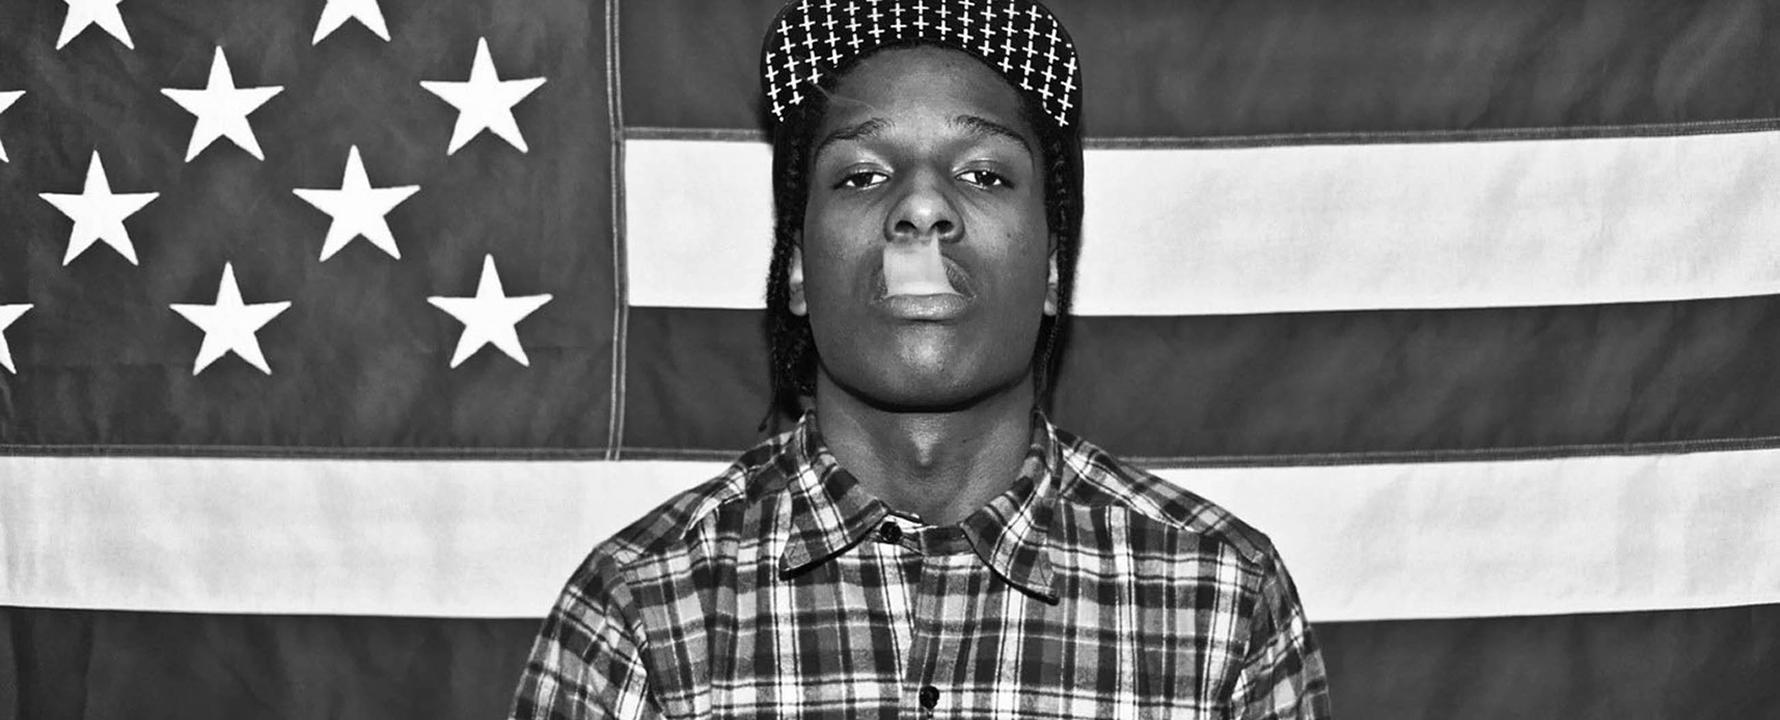 Promotional photograph of A$AP ROCKY.